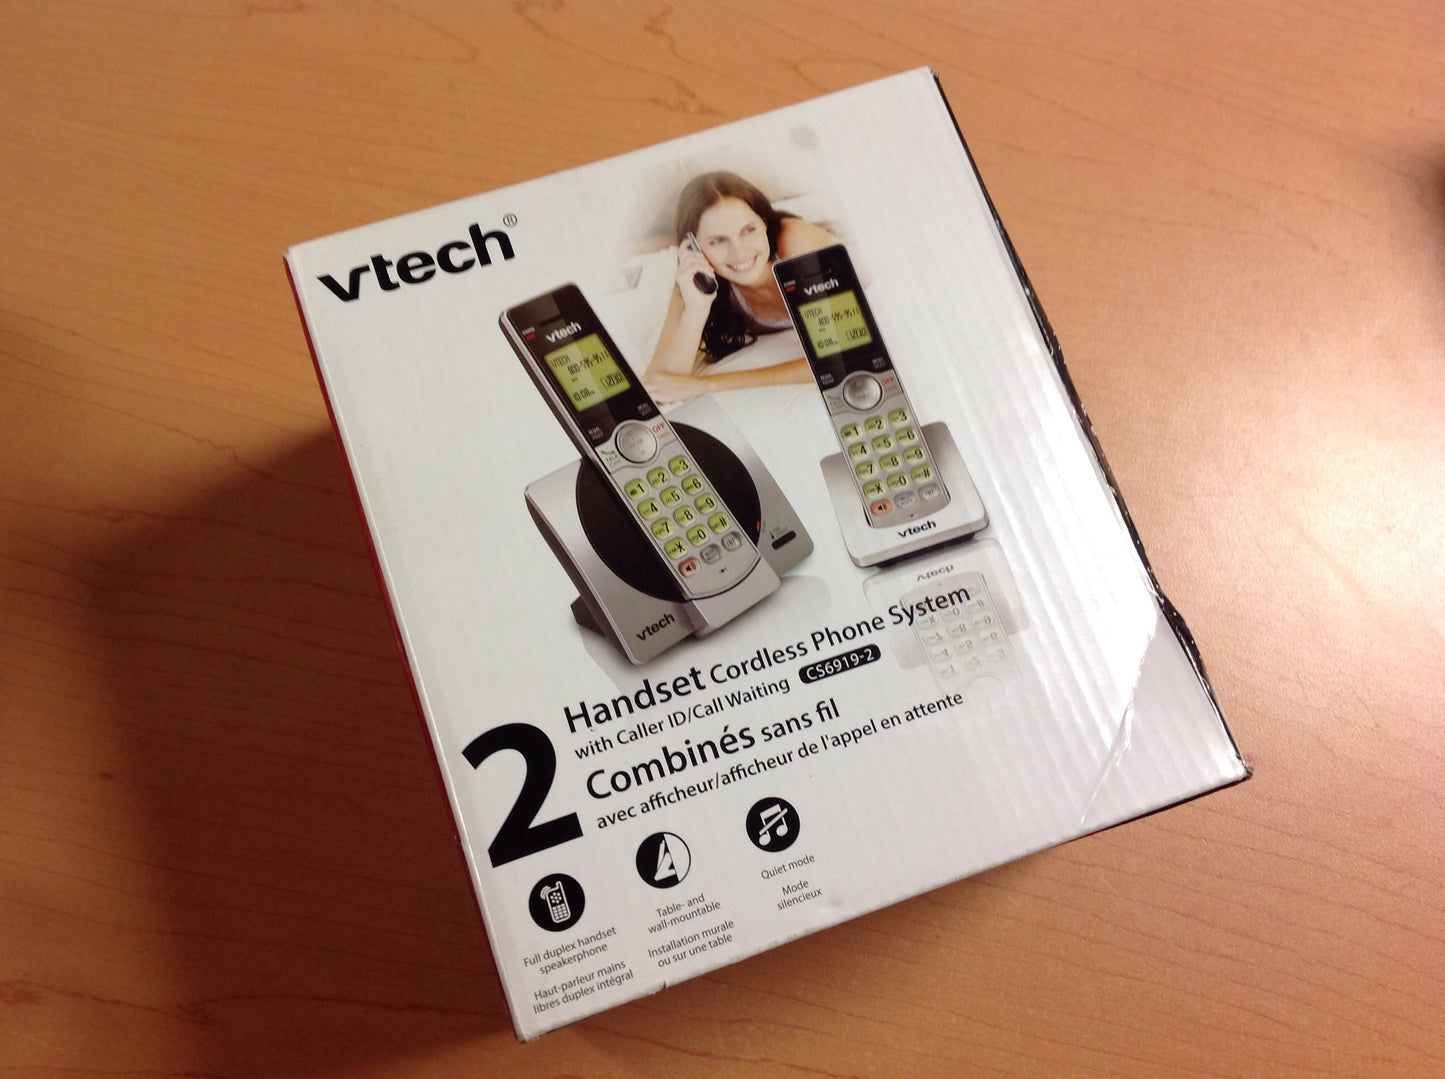 vtech 2-Handset Cordless Phone with Caller ID